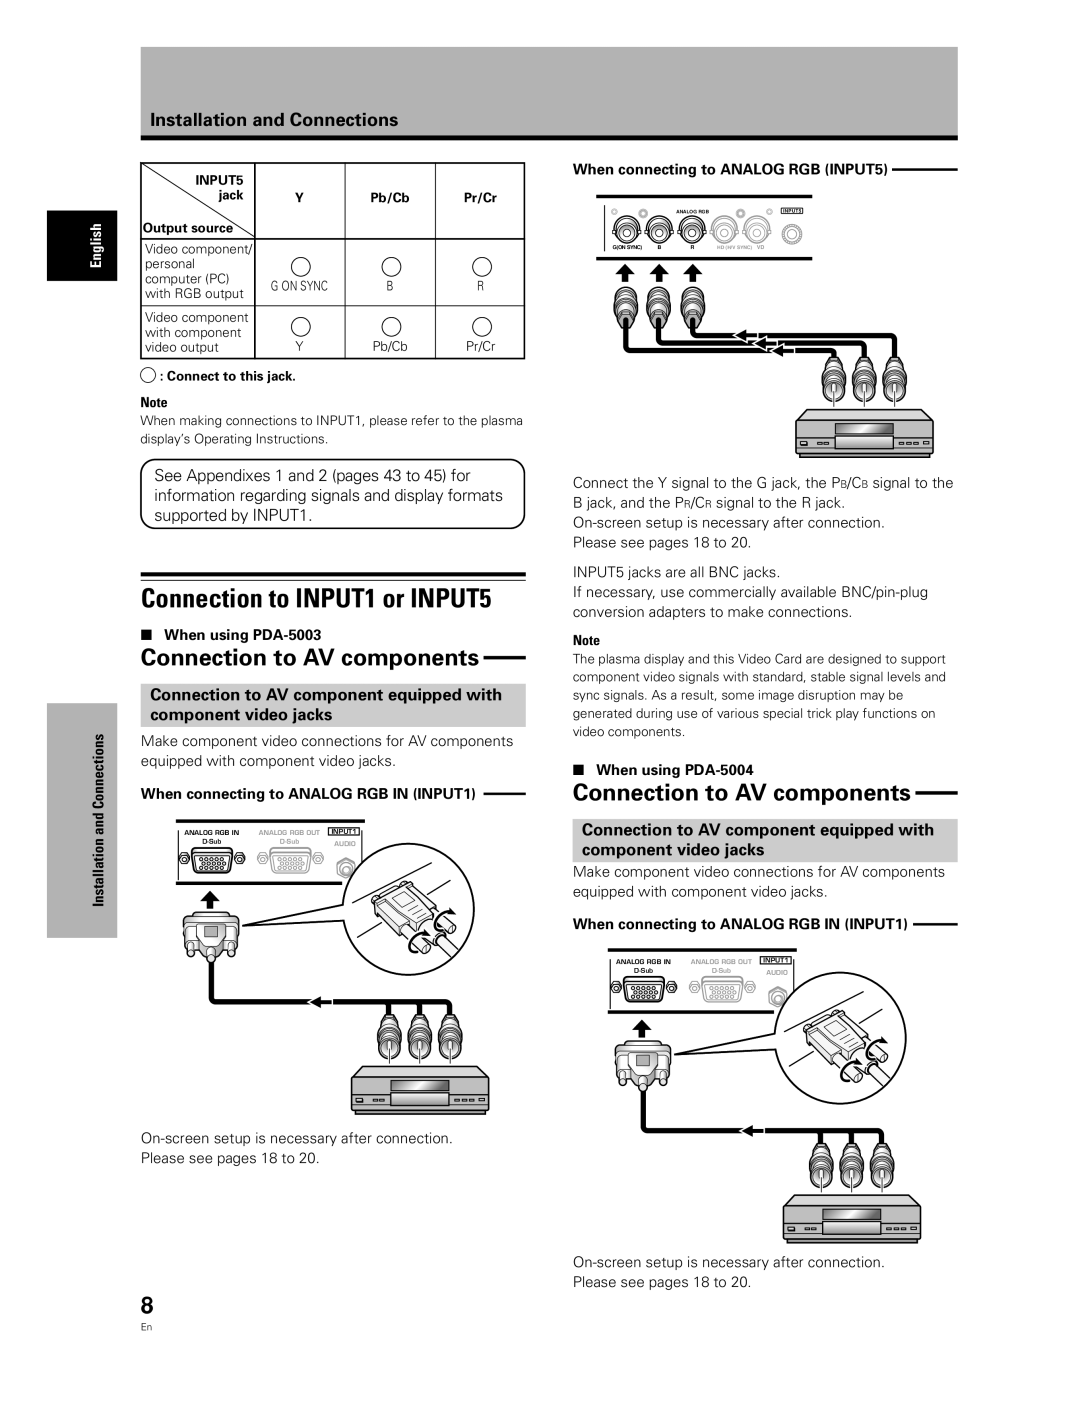 Pioneer PDA-5004 Connection to INPUT1 or INPUT5, Connection to AV components, When connecting to ANALOG RGB INPUT5, jack 